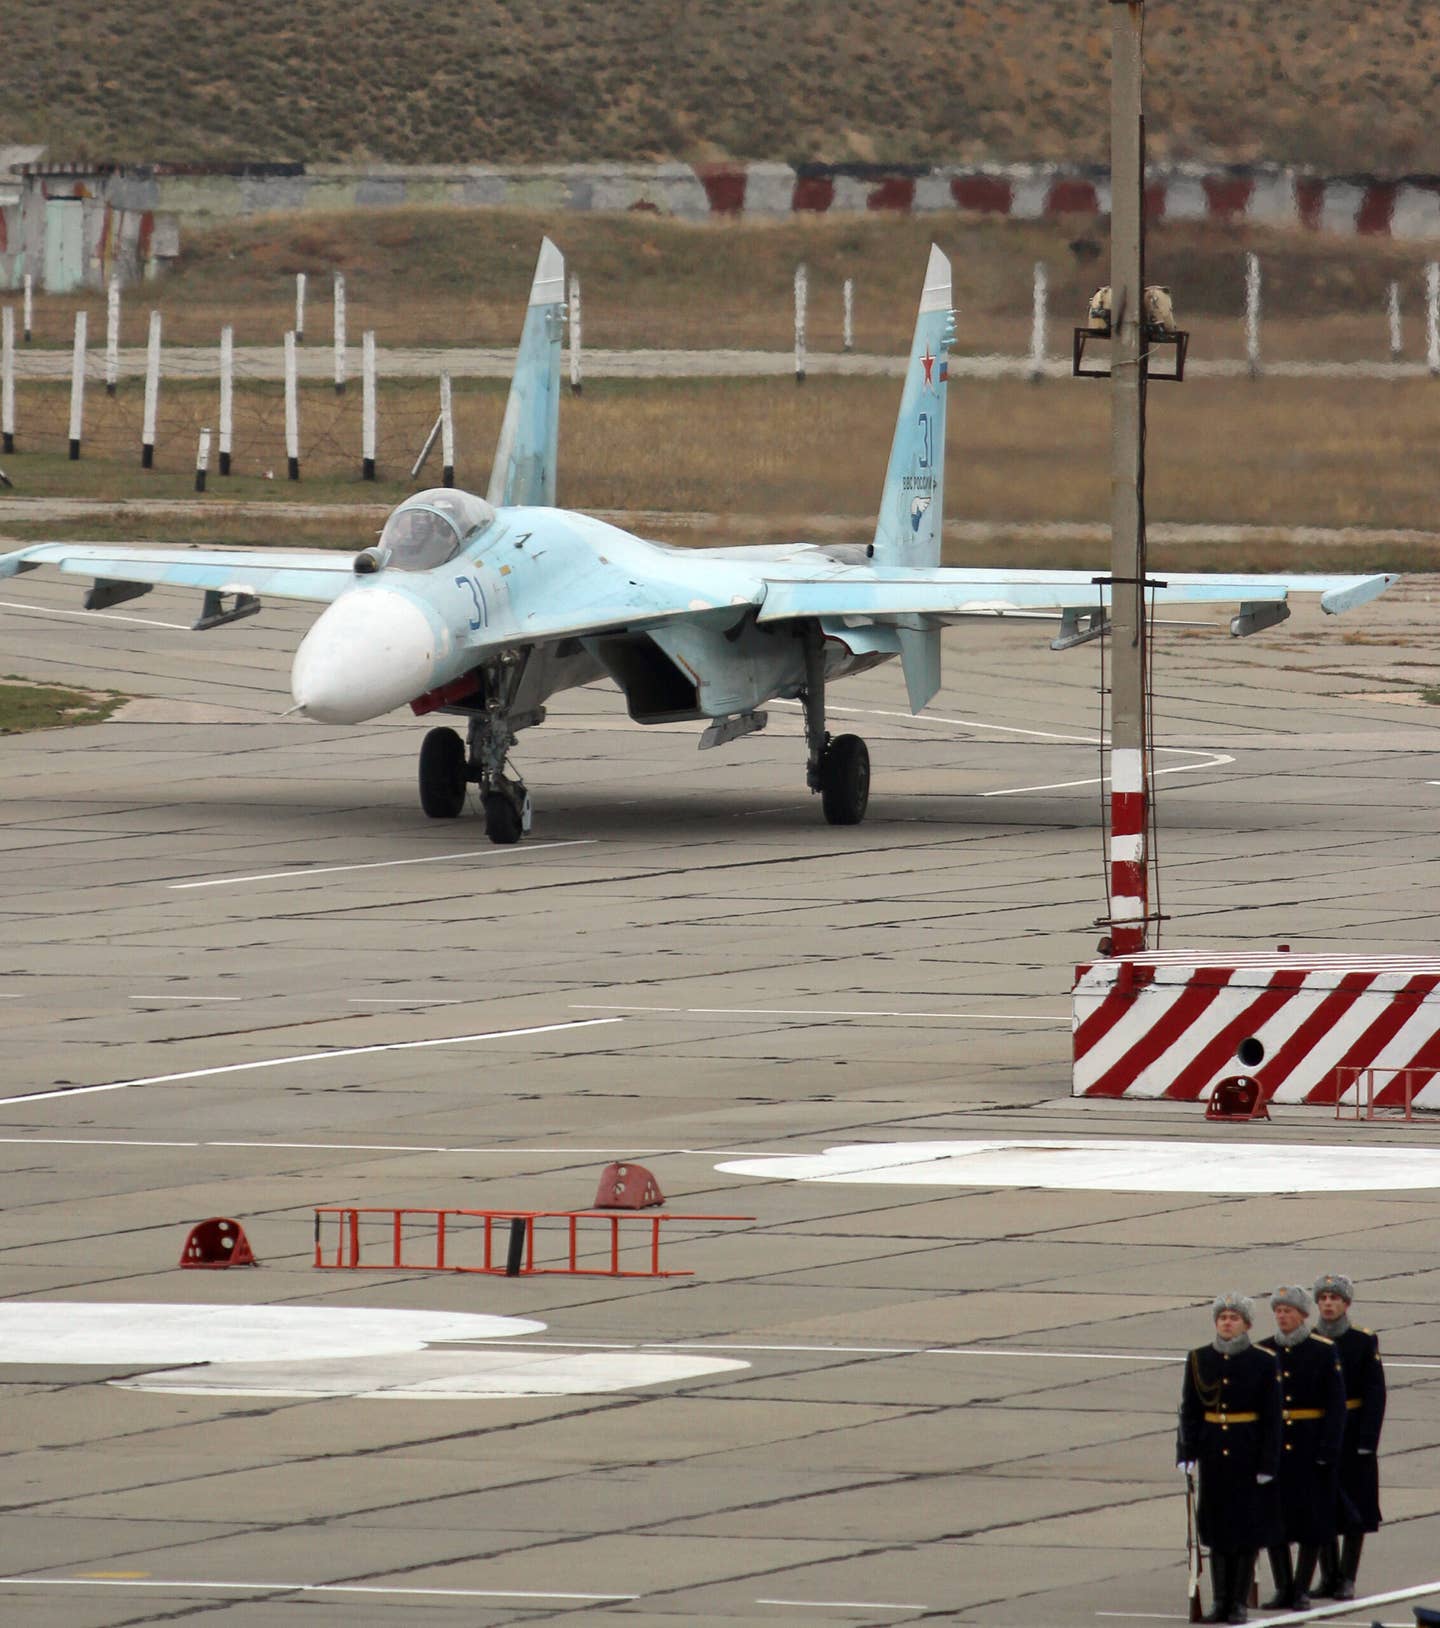 A Russian Su-27 fighter lands on the airfield of Belbek military airport outside Sevastopol on November 26, 2014. At this point, Russian airpower in Crimea was being reinforced after the annexation of the peninsula. <em>Photo by YURIY LASHOV/AFP via Getty Images</em>